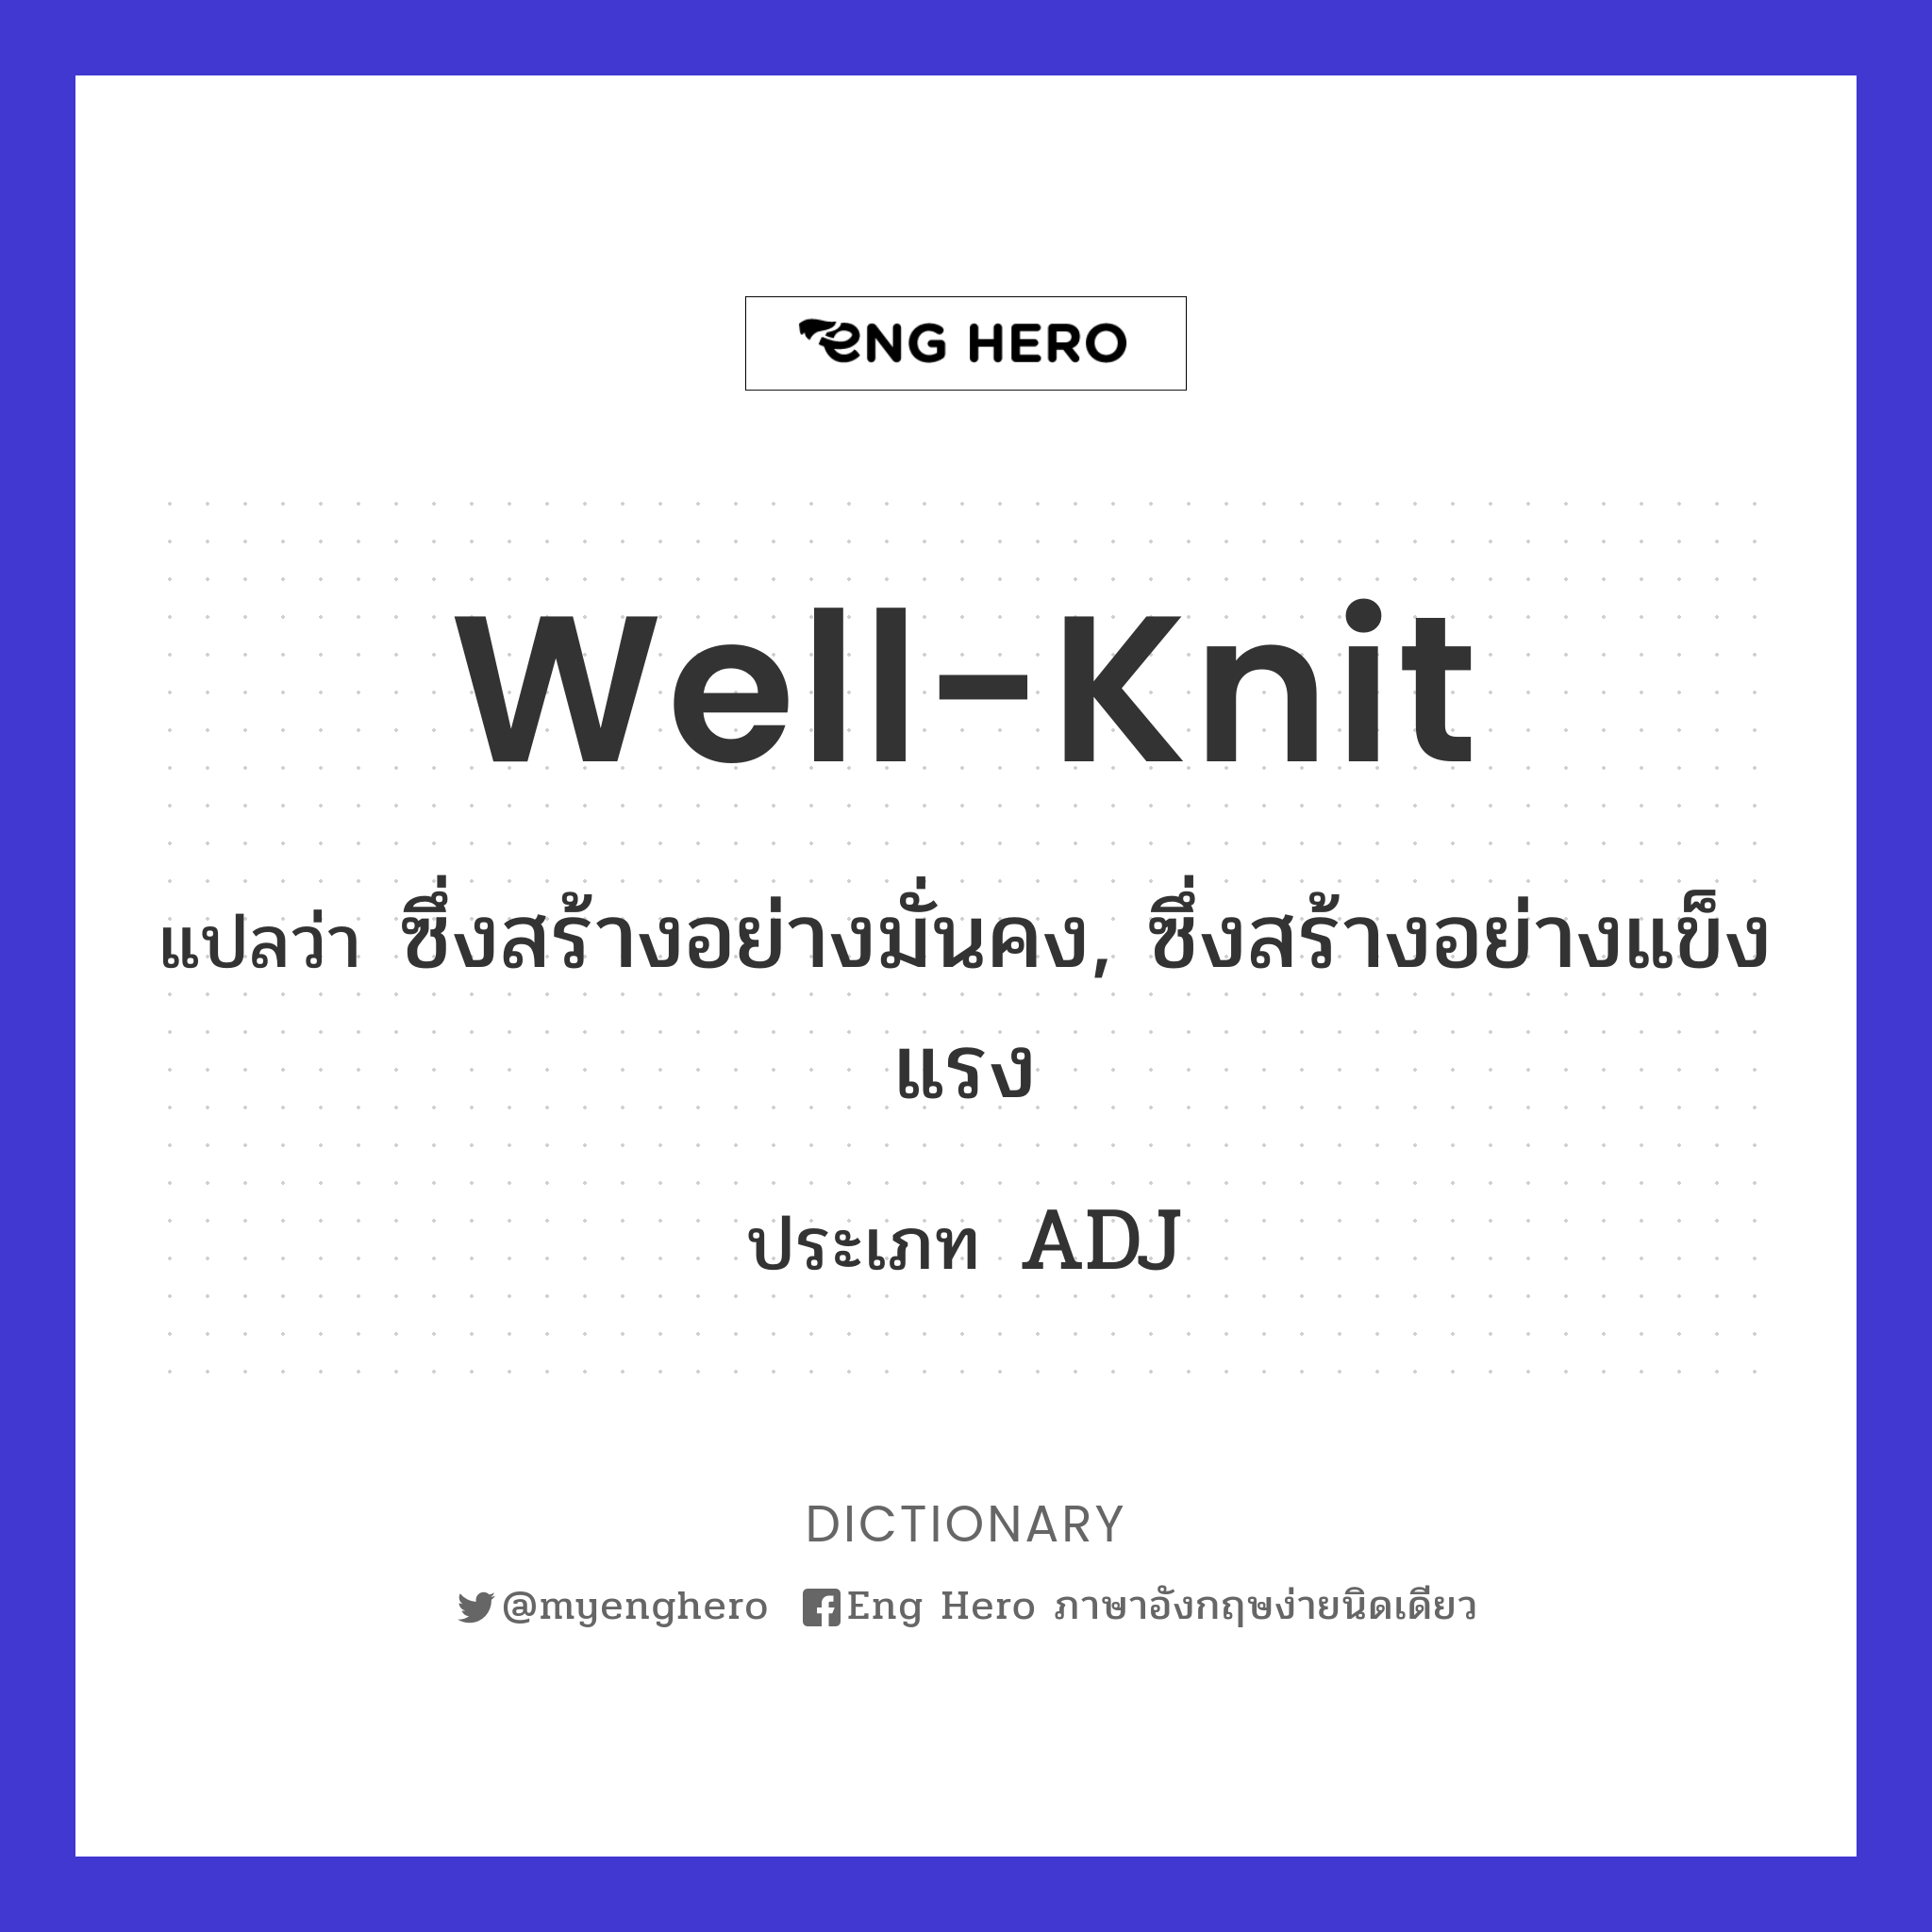 well-knit